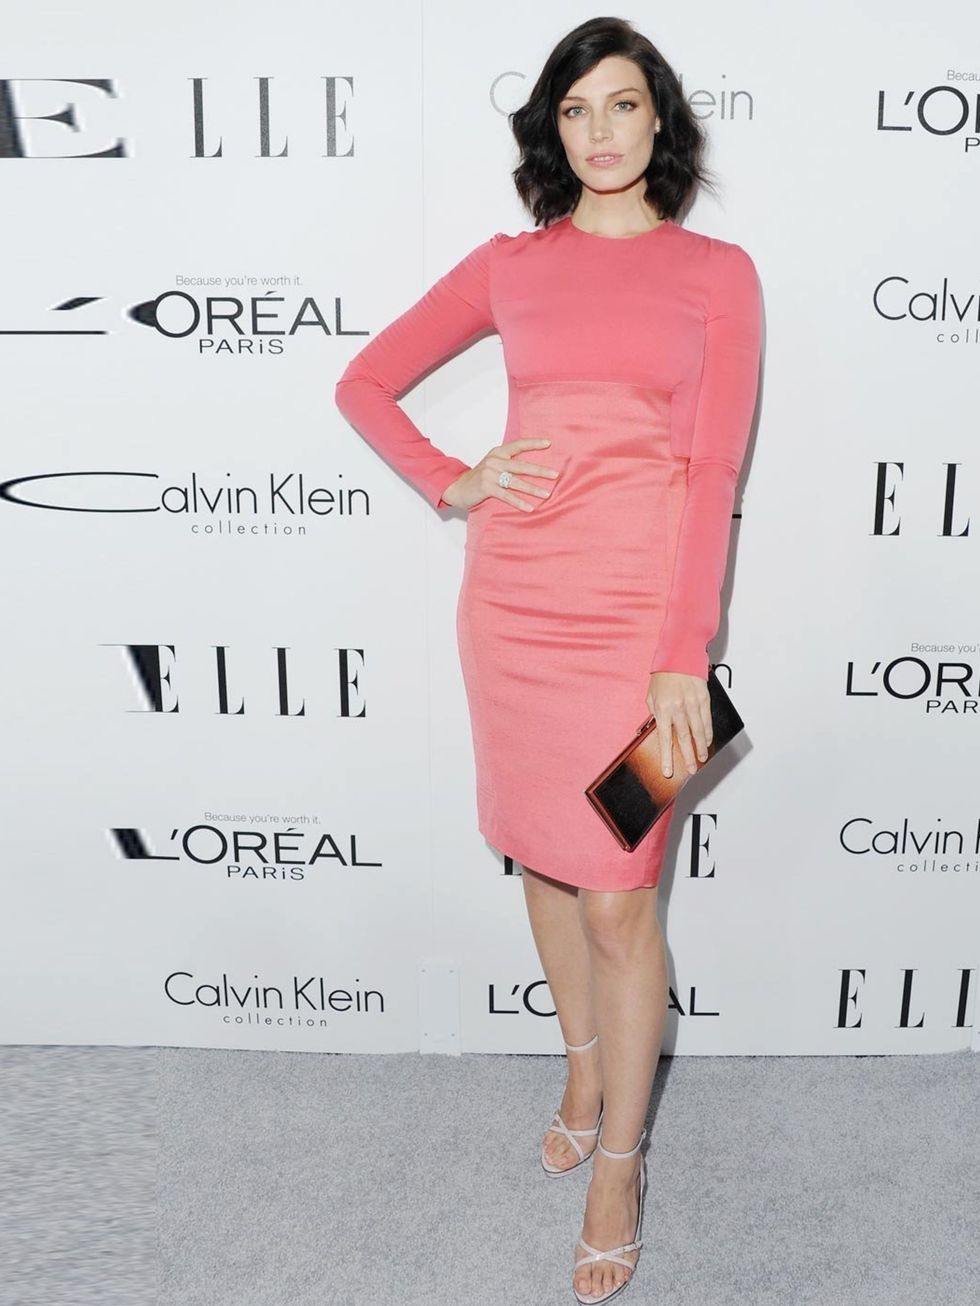 <p>Jessica Pare wears a dress from the Calvin Klein Collection to the ELLE's 20th Annual Women In Hollywood celebration, October 2013.</p><p><a href="http://www.elleuk.com/star-style/news/the-feminist-vending-machine-imawomanand-feminism-wieden-kennedy-va